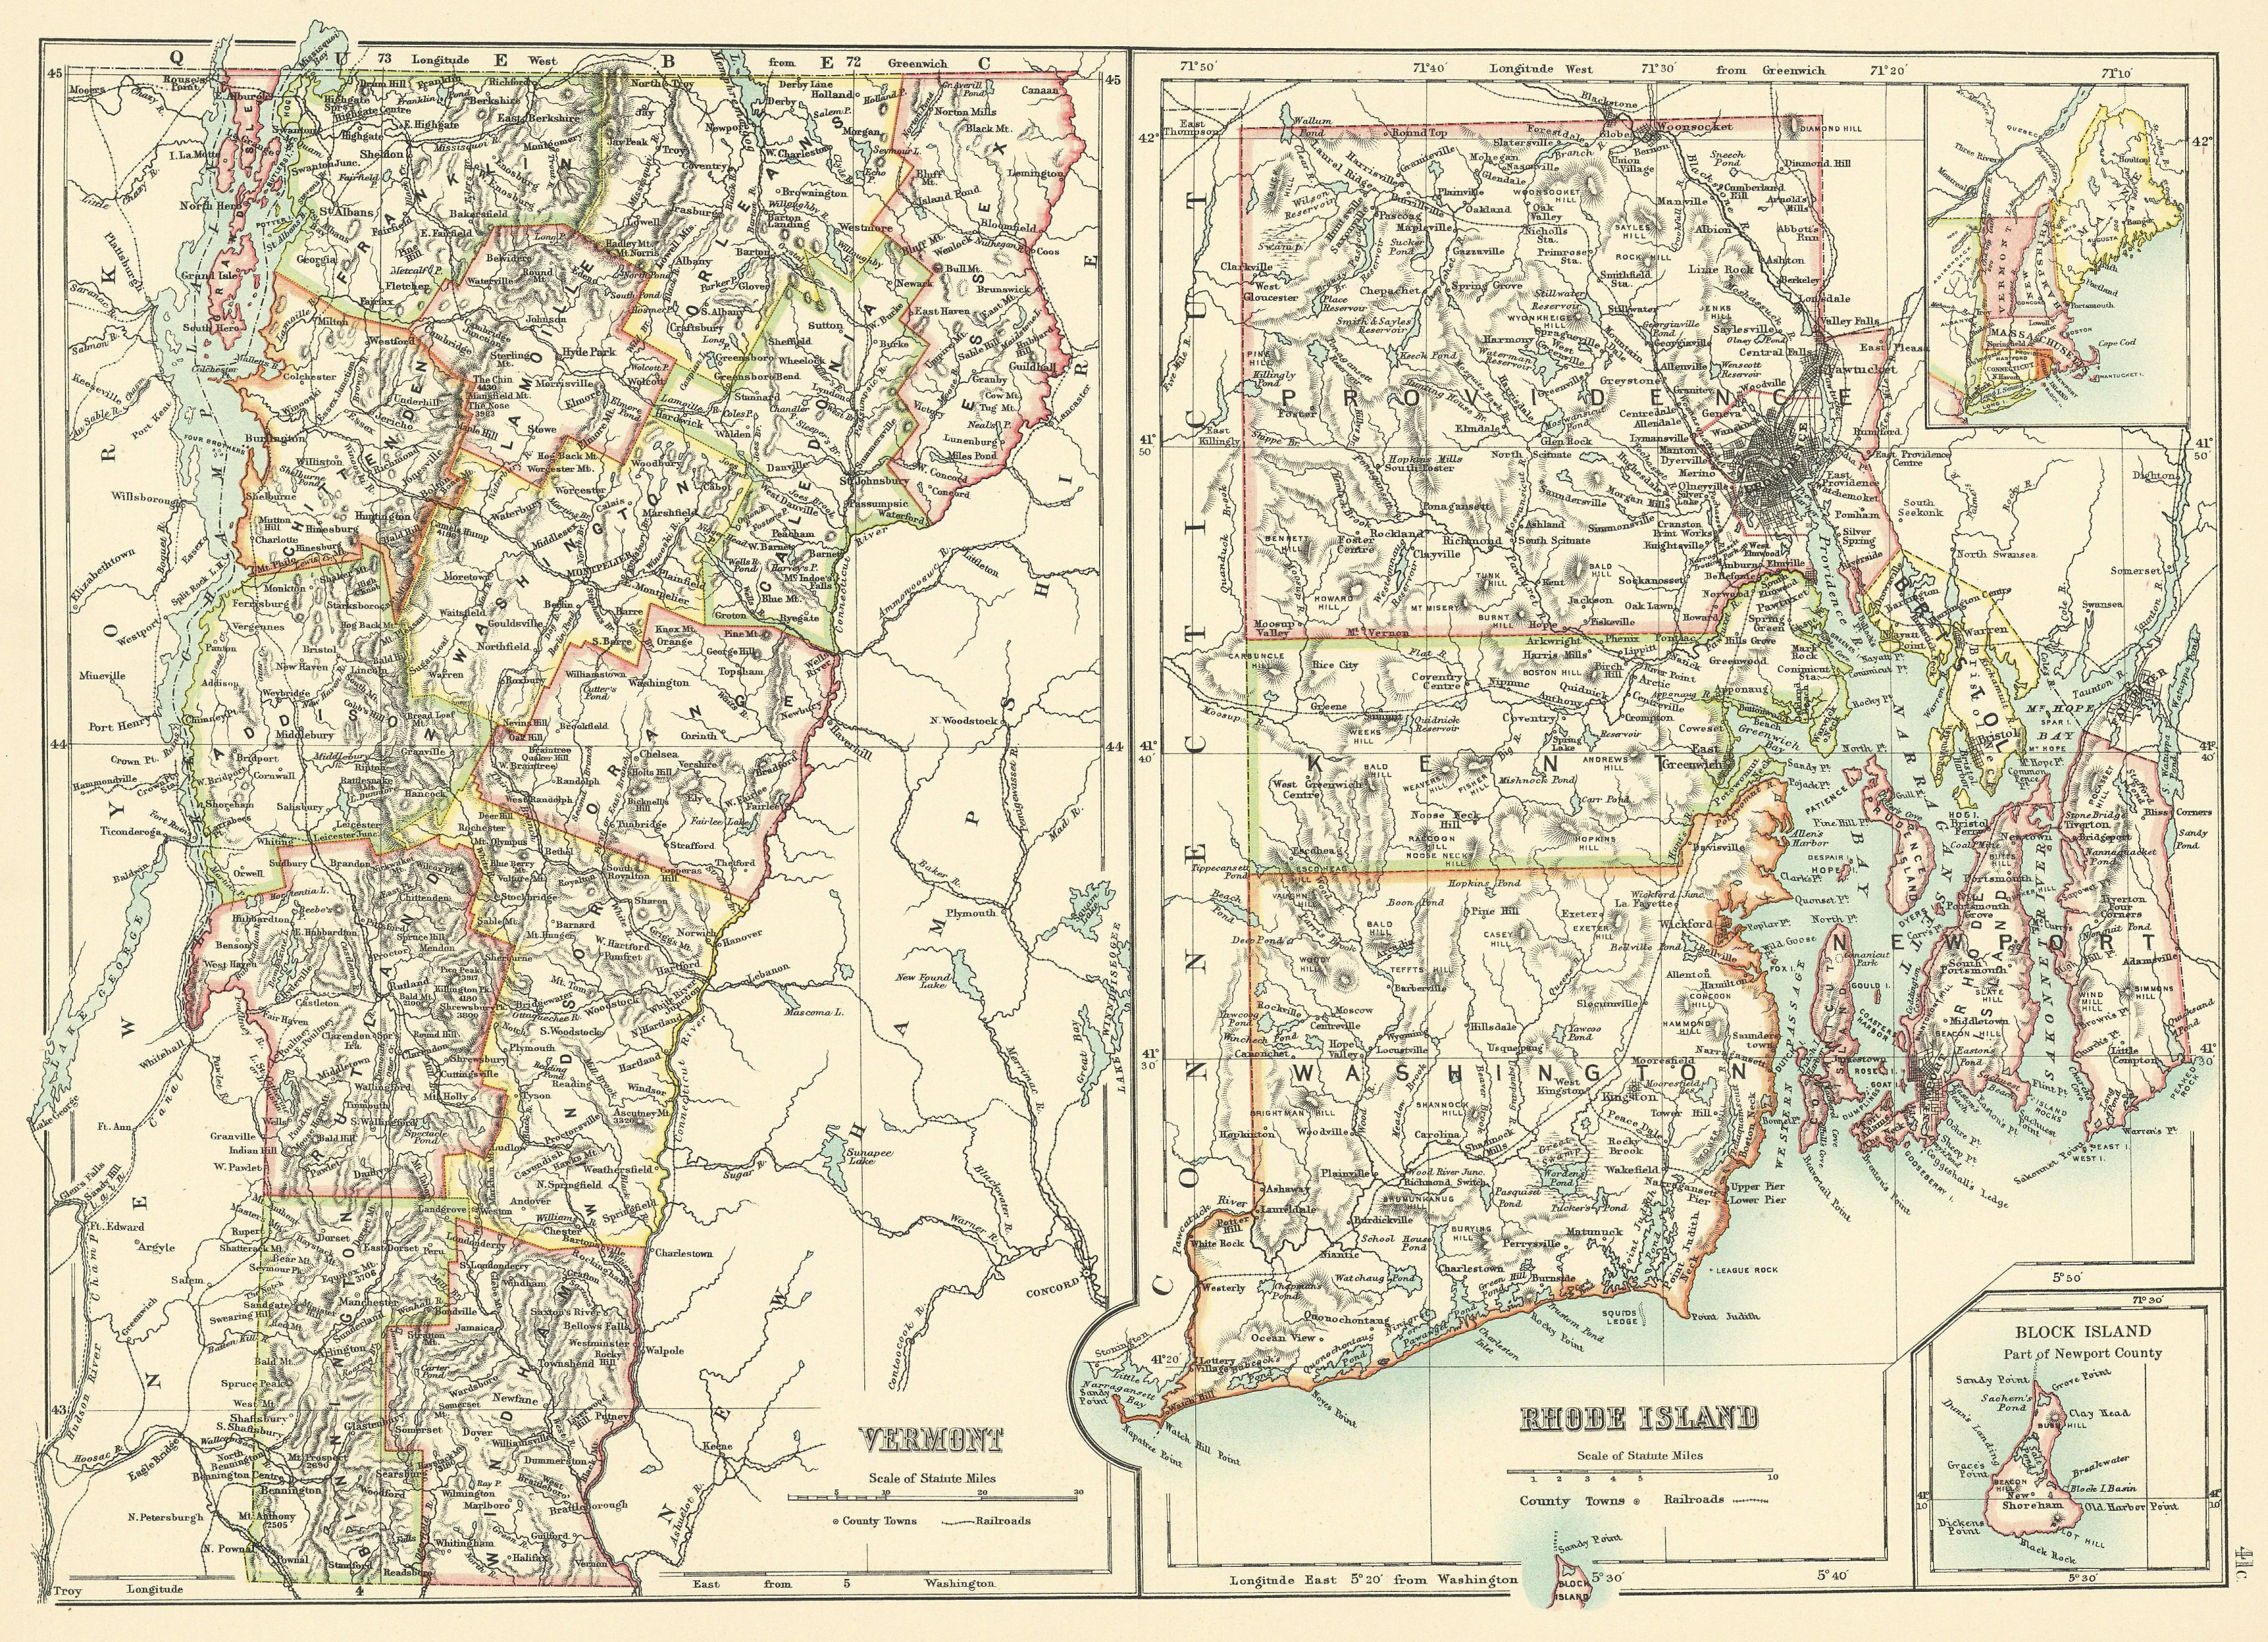 Associate Product Rhode Island and Vermont state maps showing counties. BARTHOLOMEW 1898 old